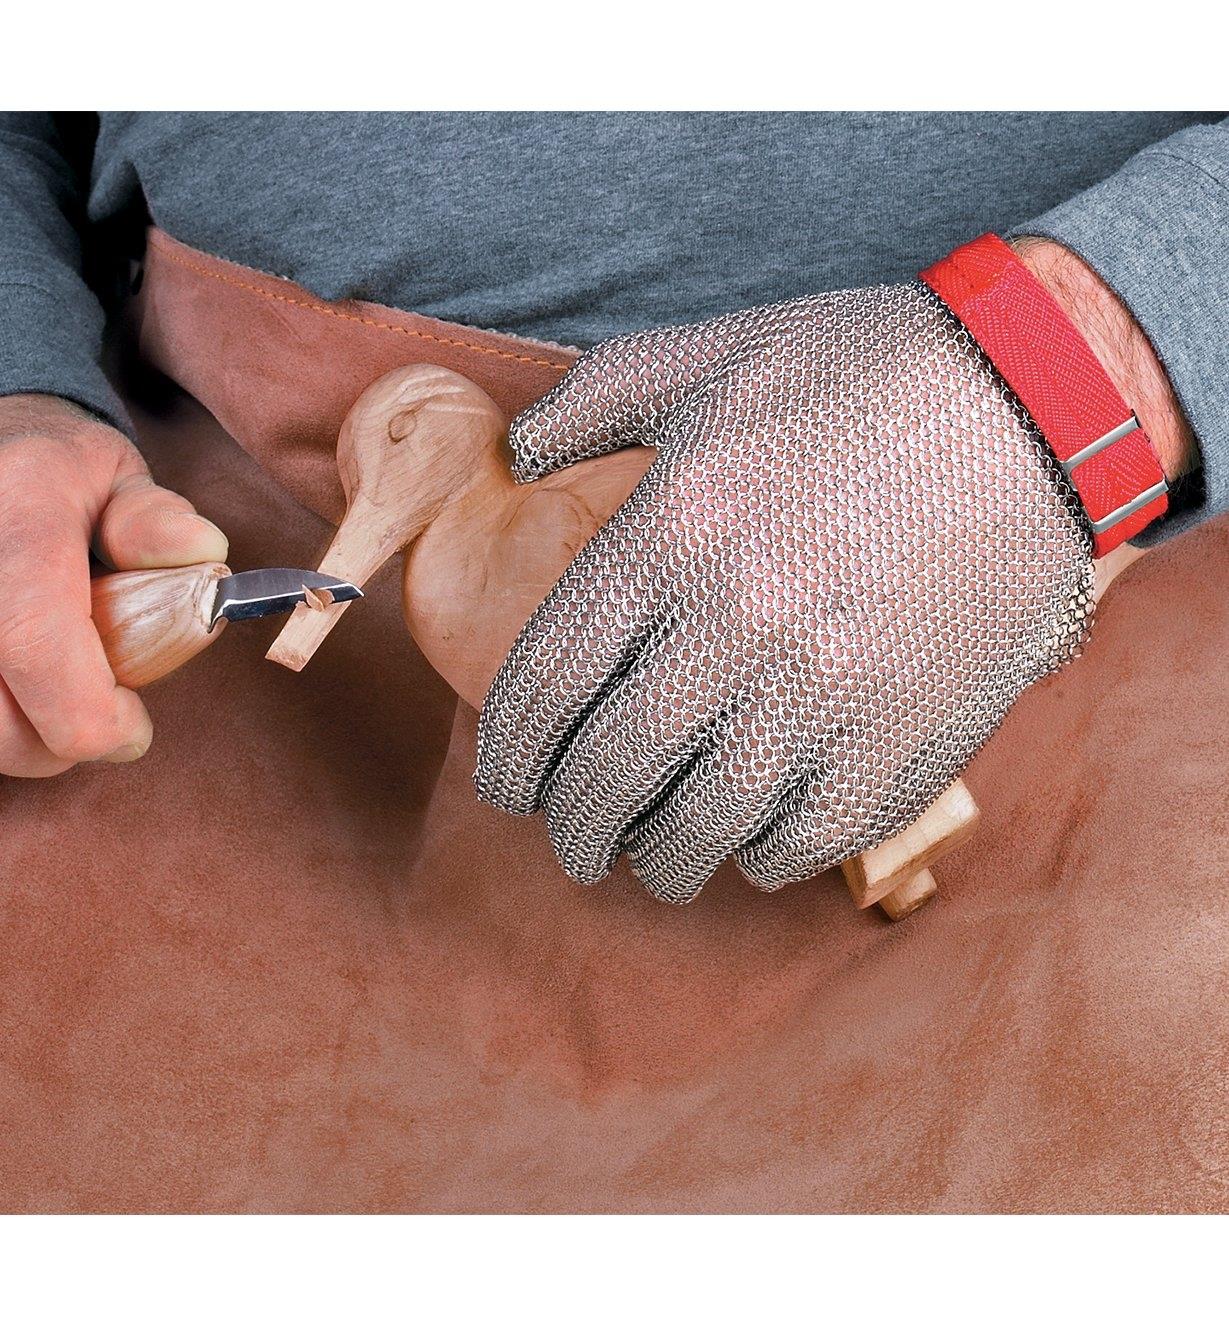 A person carves a wooden bird while wearing a Carver's Chain Mail Glove